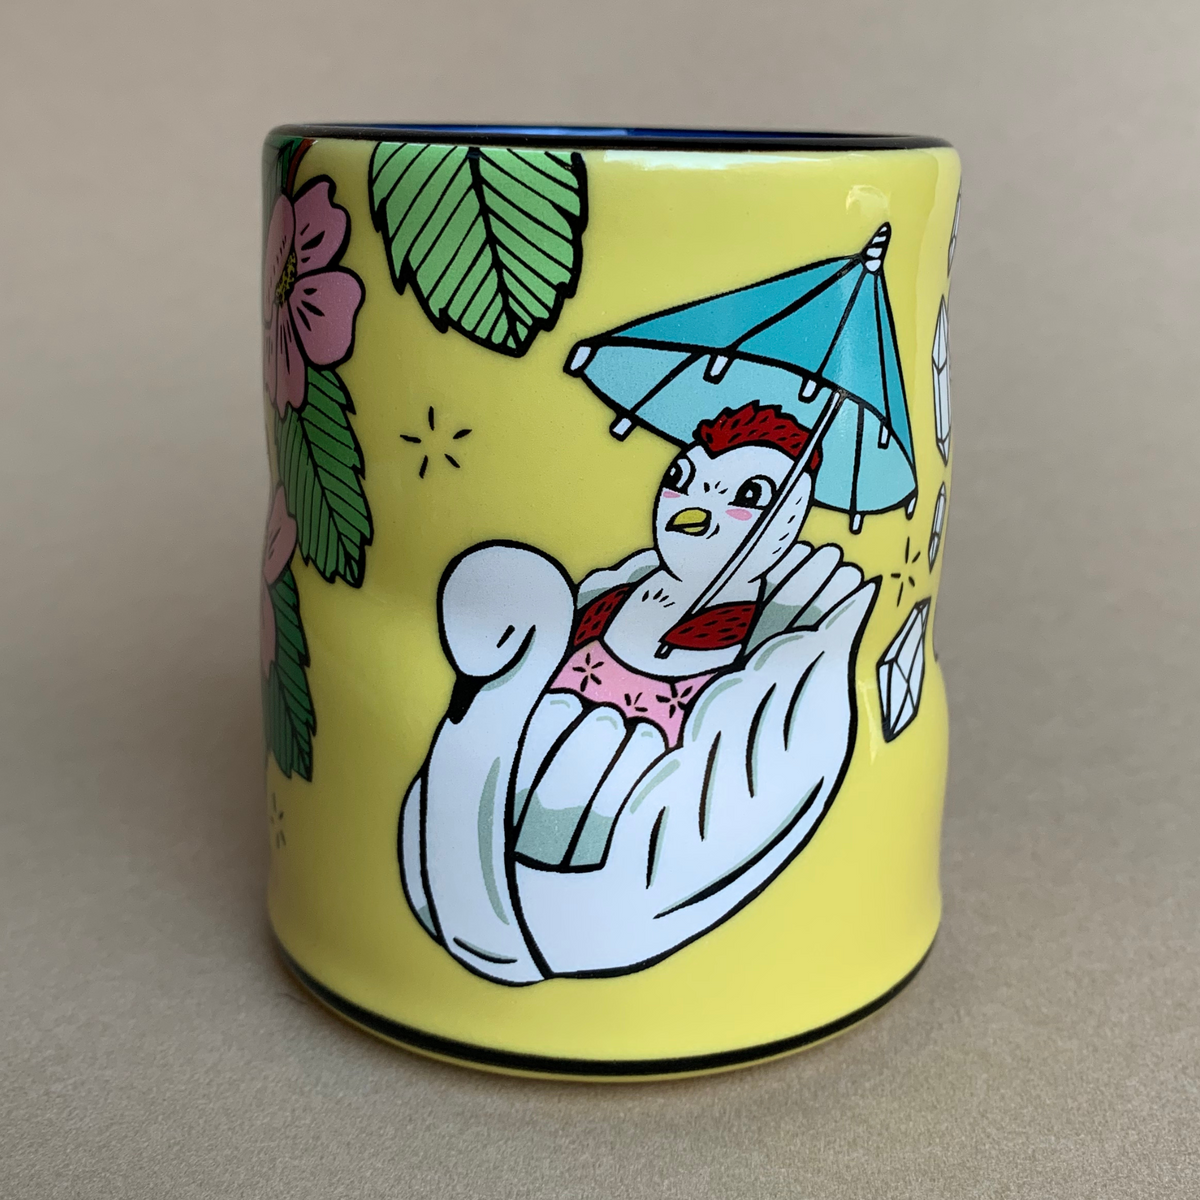 Fairies Name Spark Cup - Large